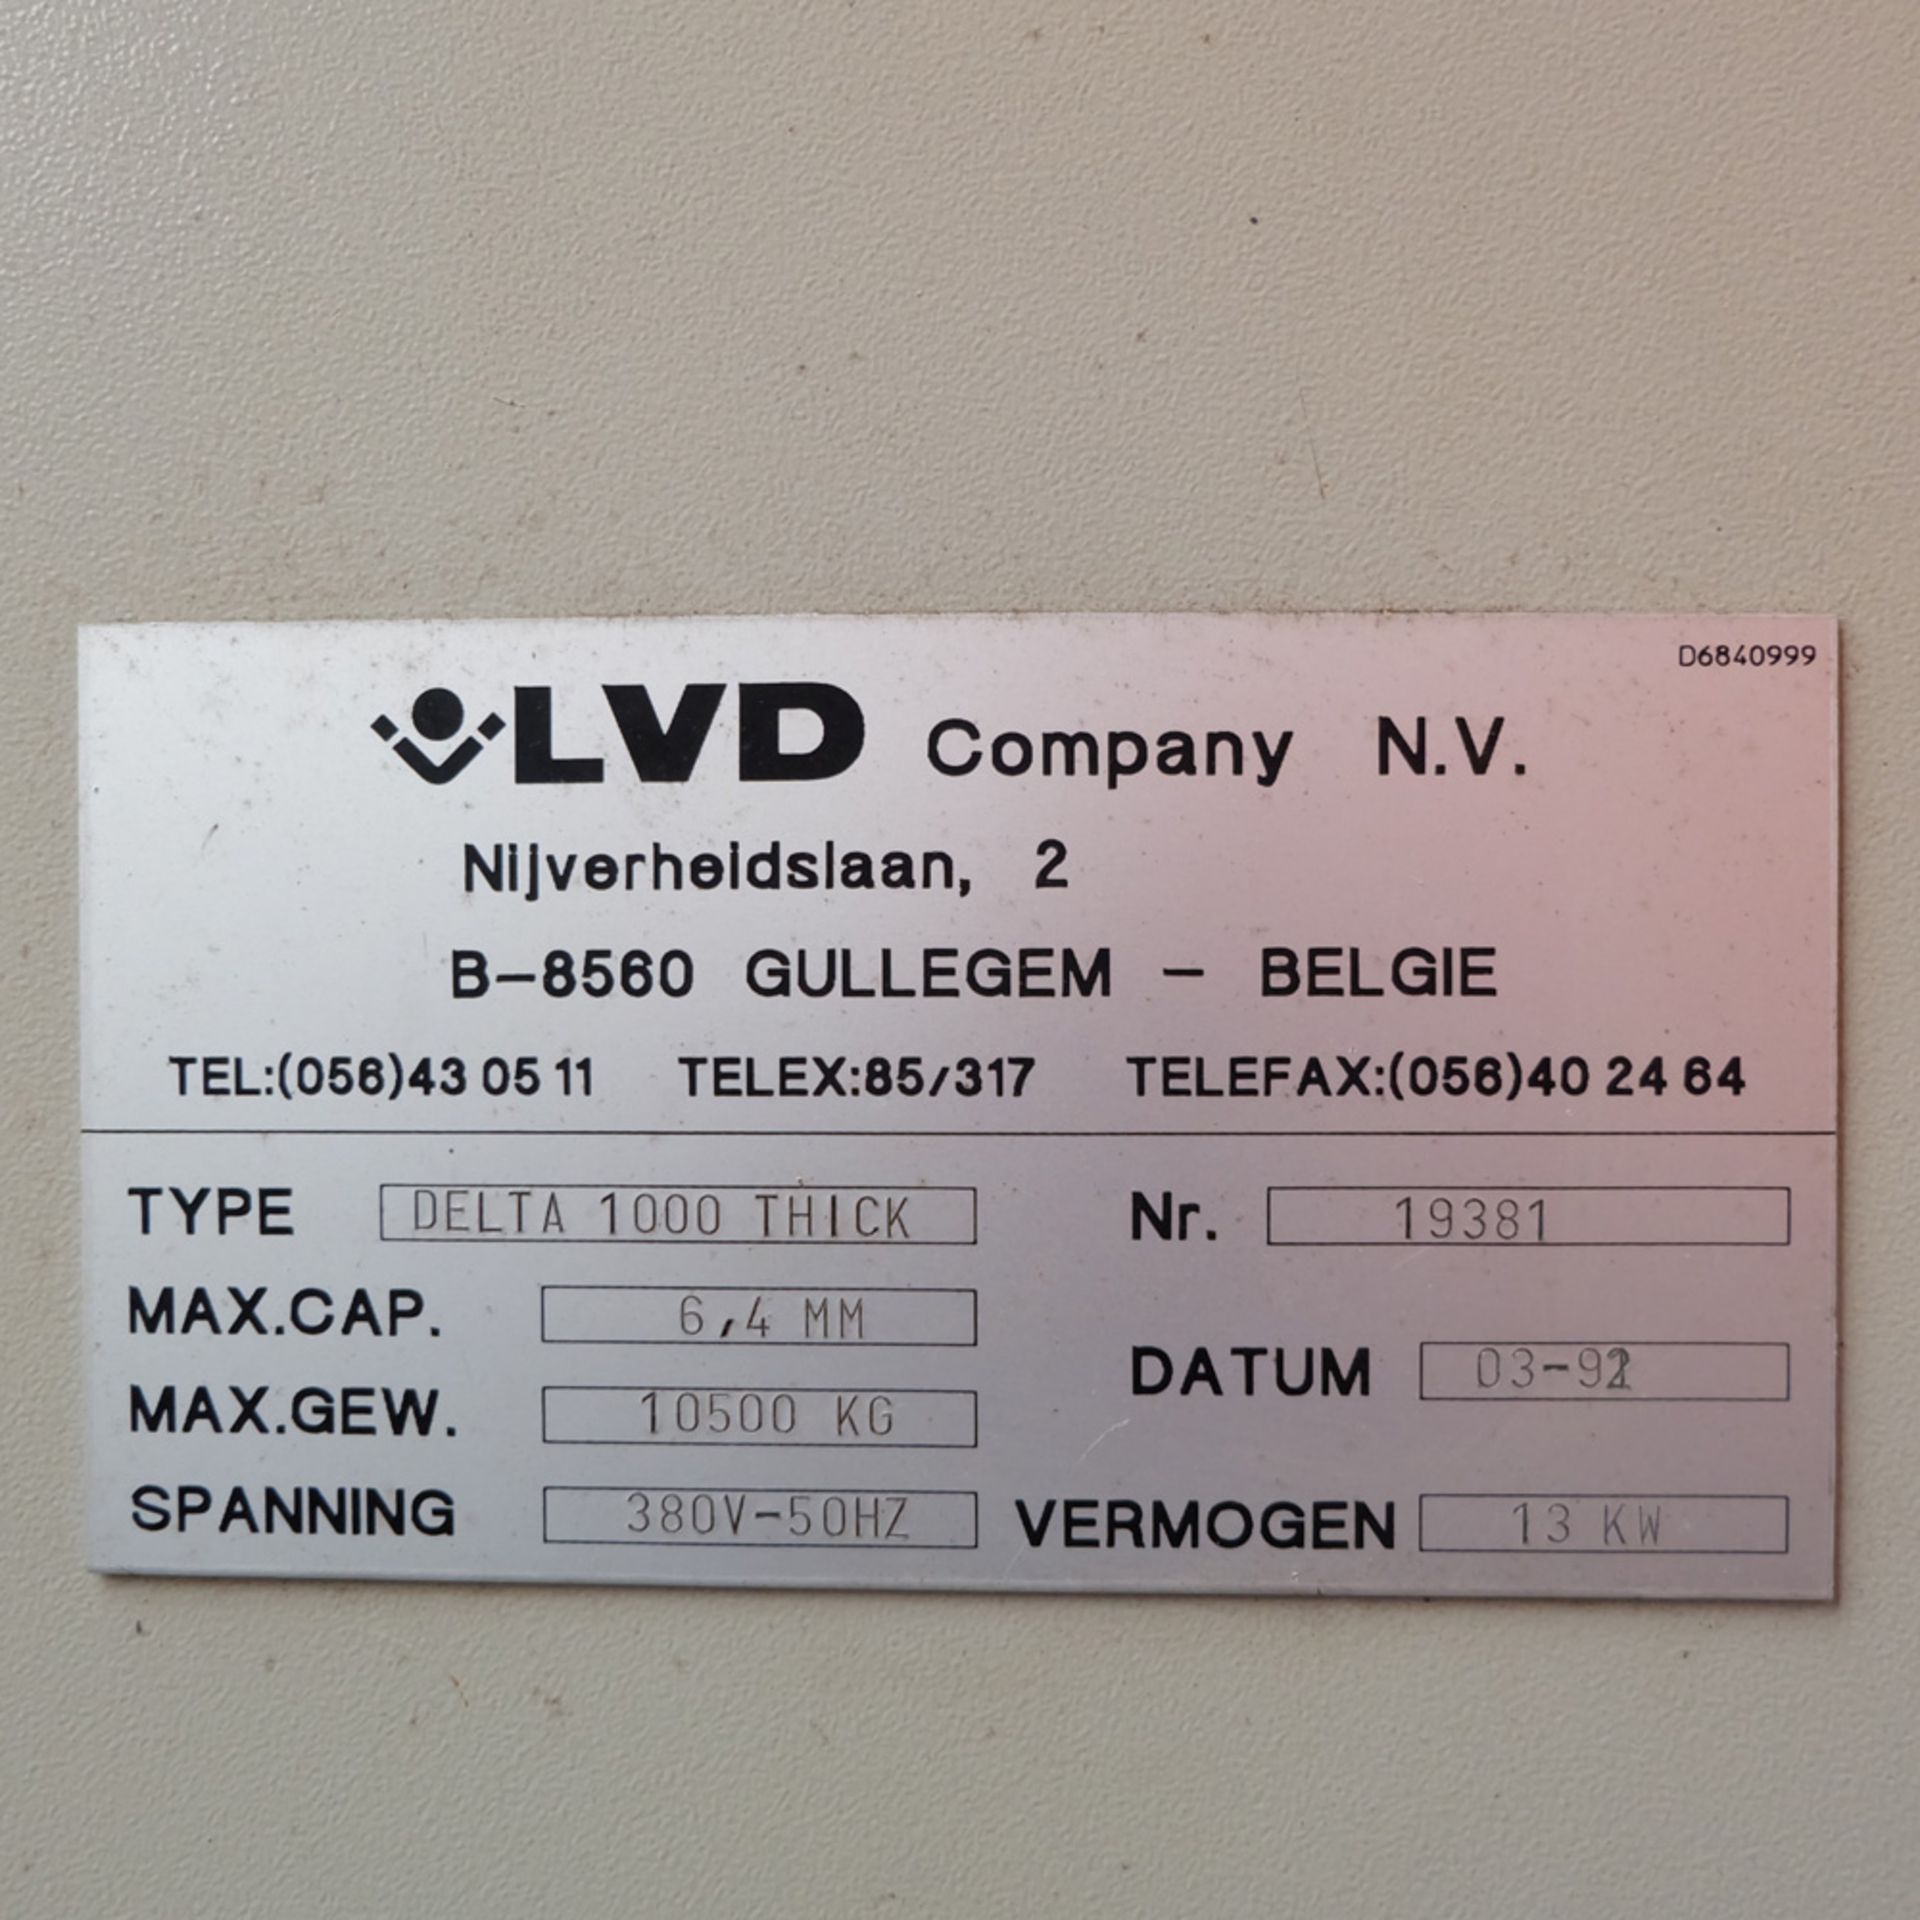 LVD SHAPE Model Delta 1000 Thick CNC Punching Machine.With Fanuc MNC 4000 Control.Capacity: 20 Tons. - Image 12 of 19